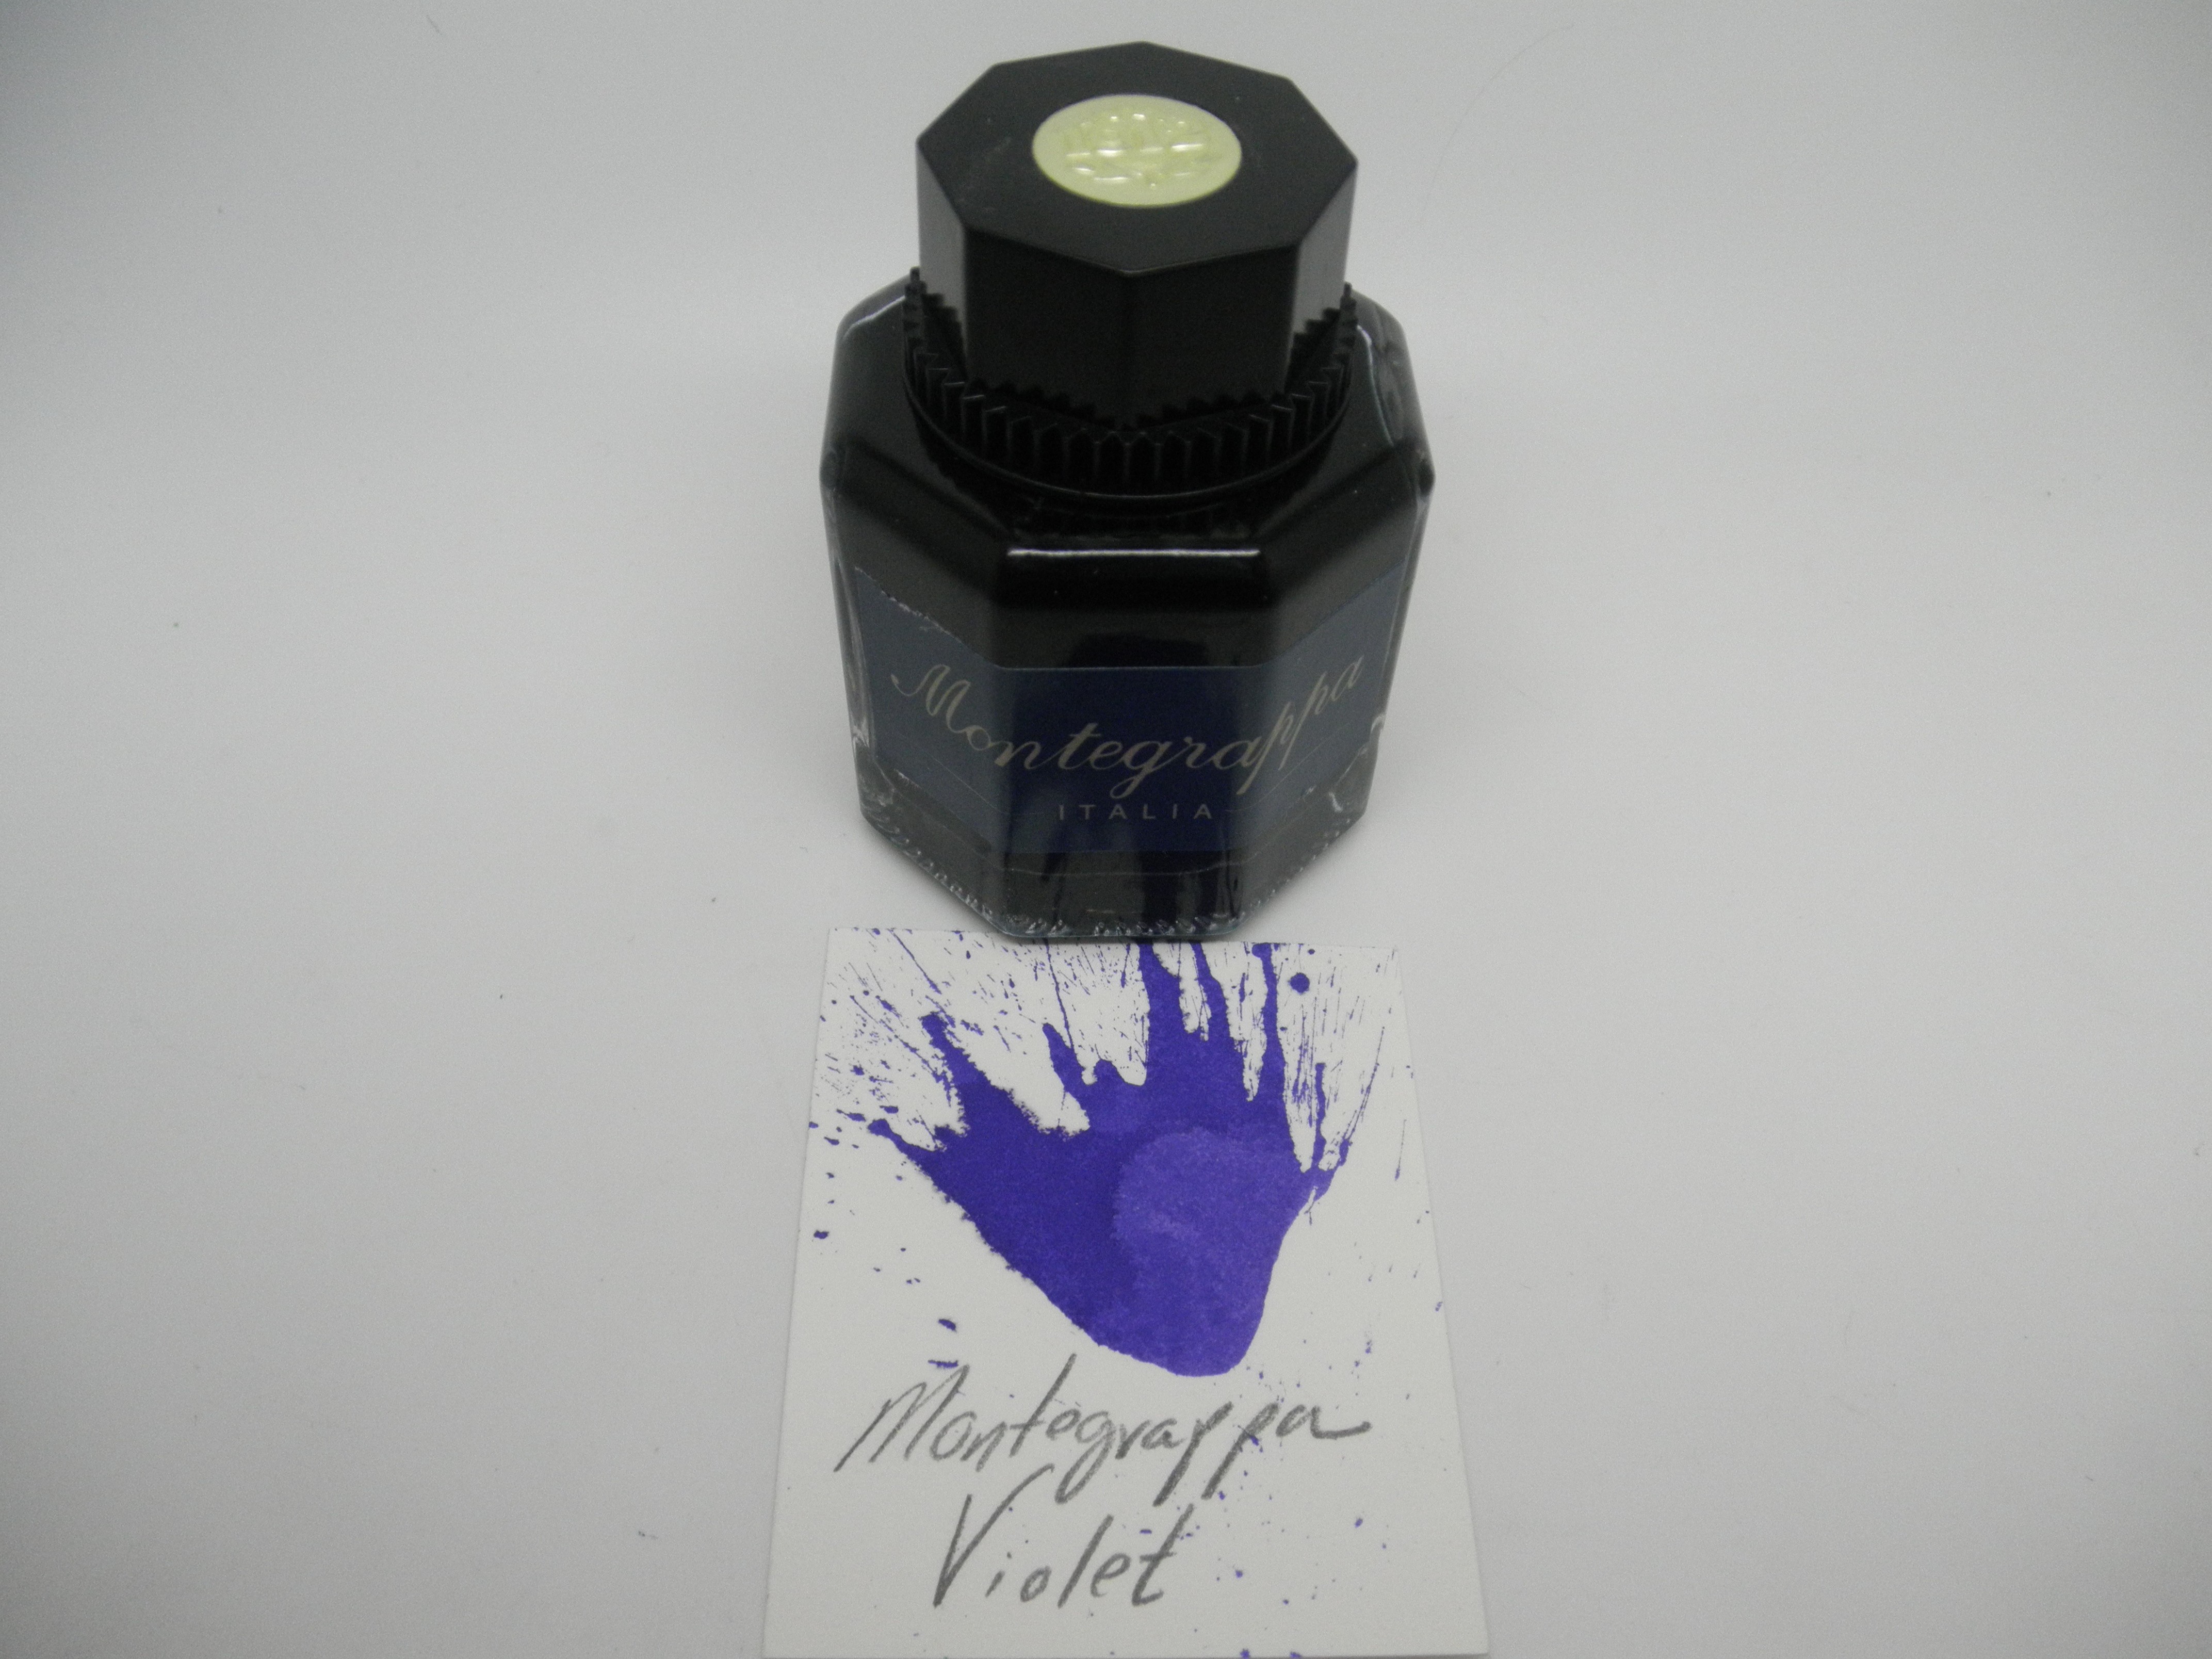 Montegrappa Violet Fountain Pen Ink